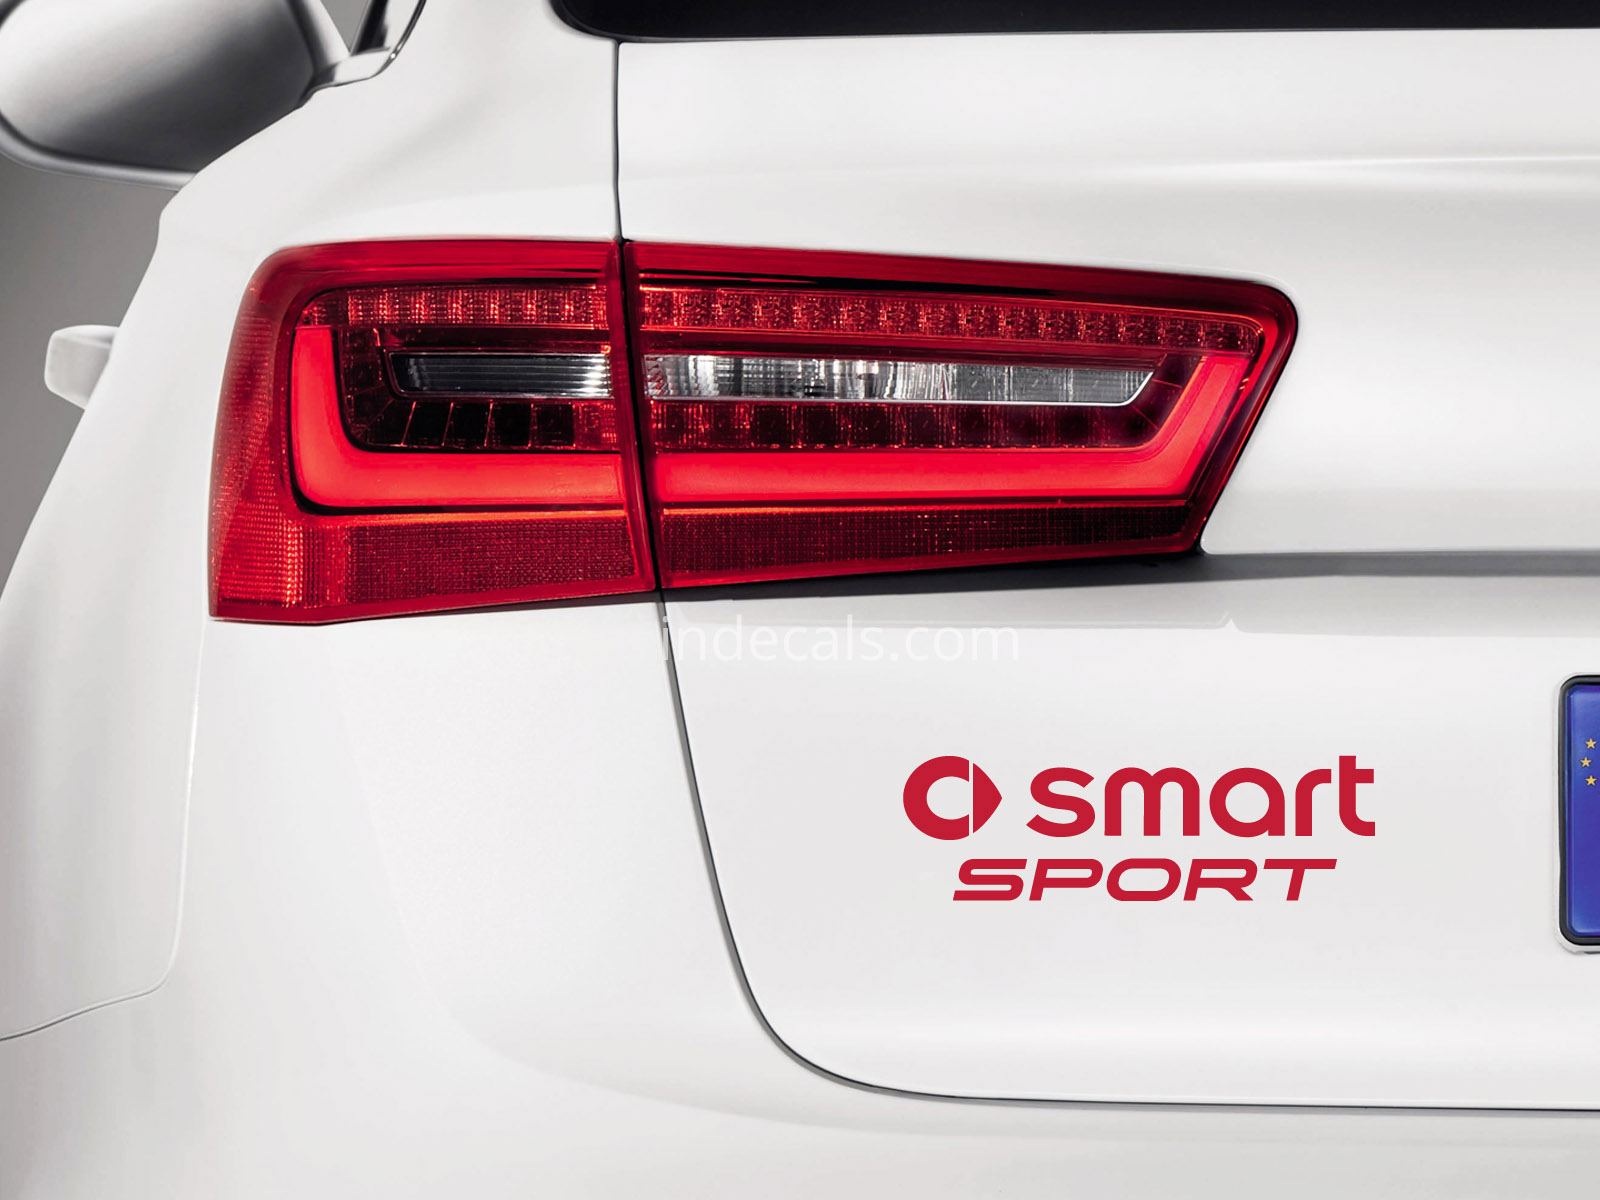 1 x Smart Sports Sticker for Trunk - Red